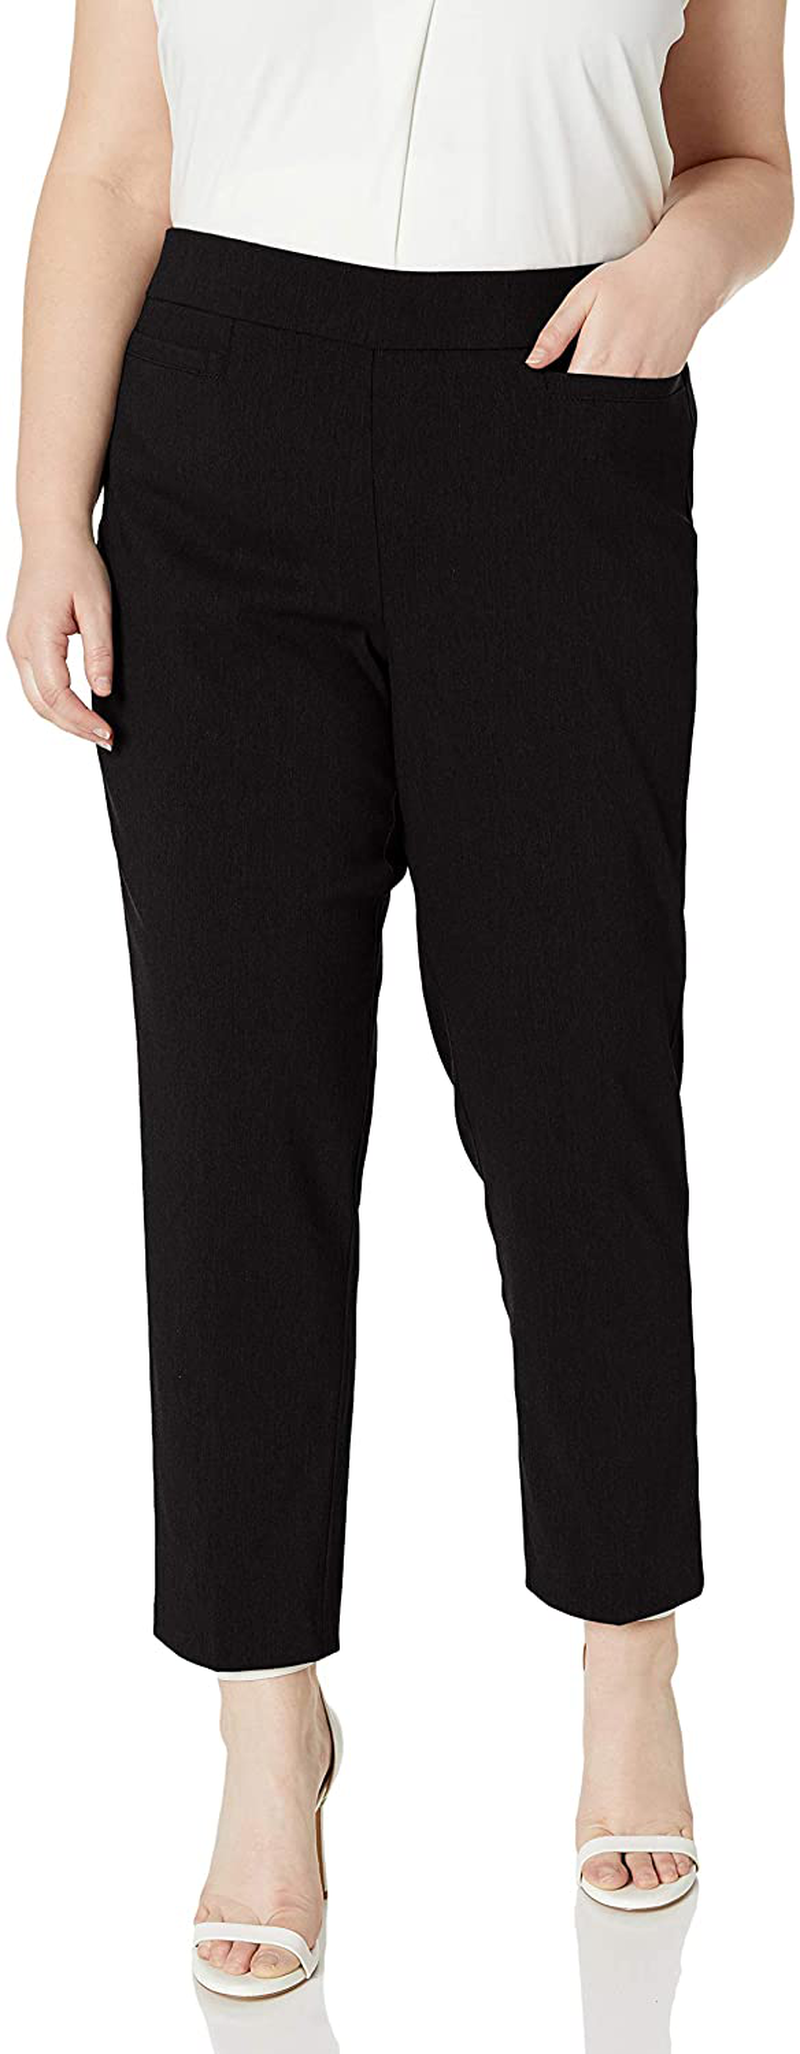 Alfred Dunner Women's Allure Slimming Plus Size Stretch Pants-Modern Fit